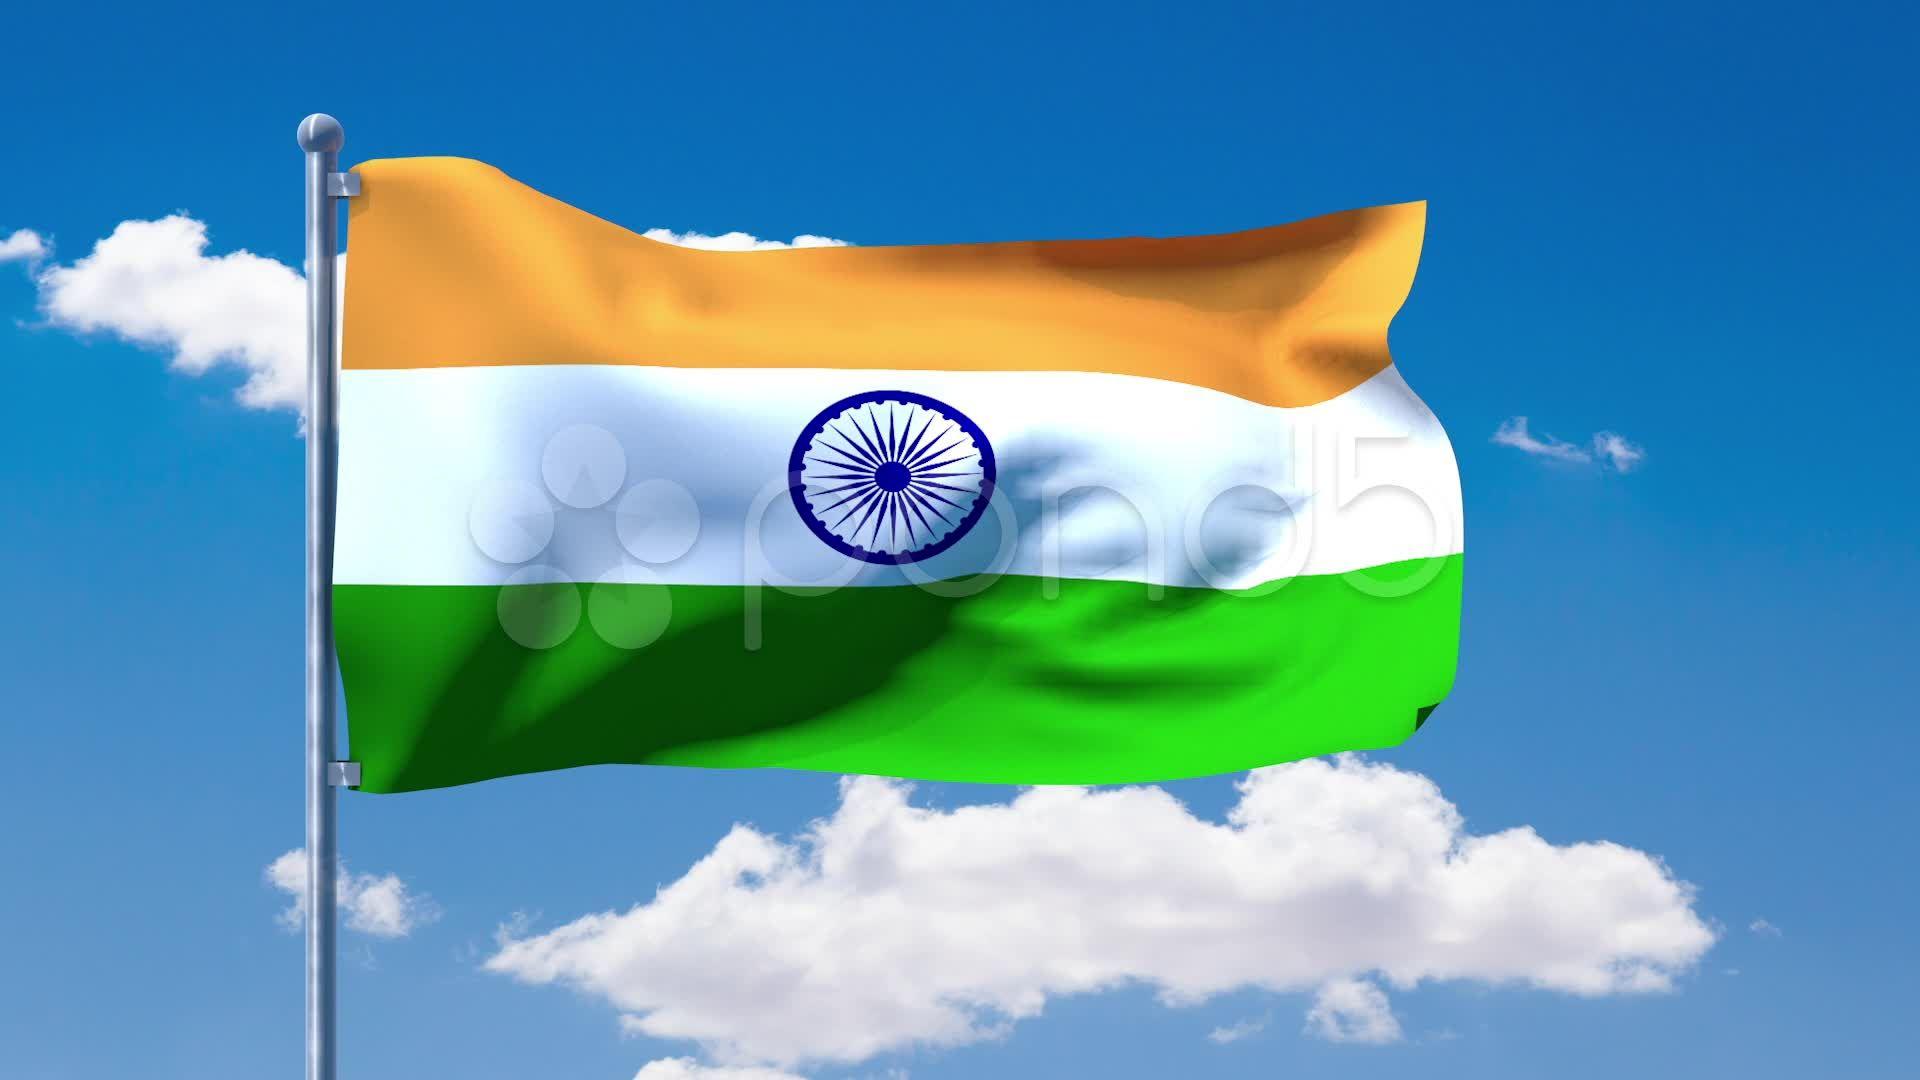 Video: Indian flag waving over a blue cloudy sky